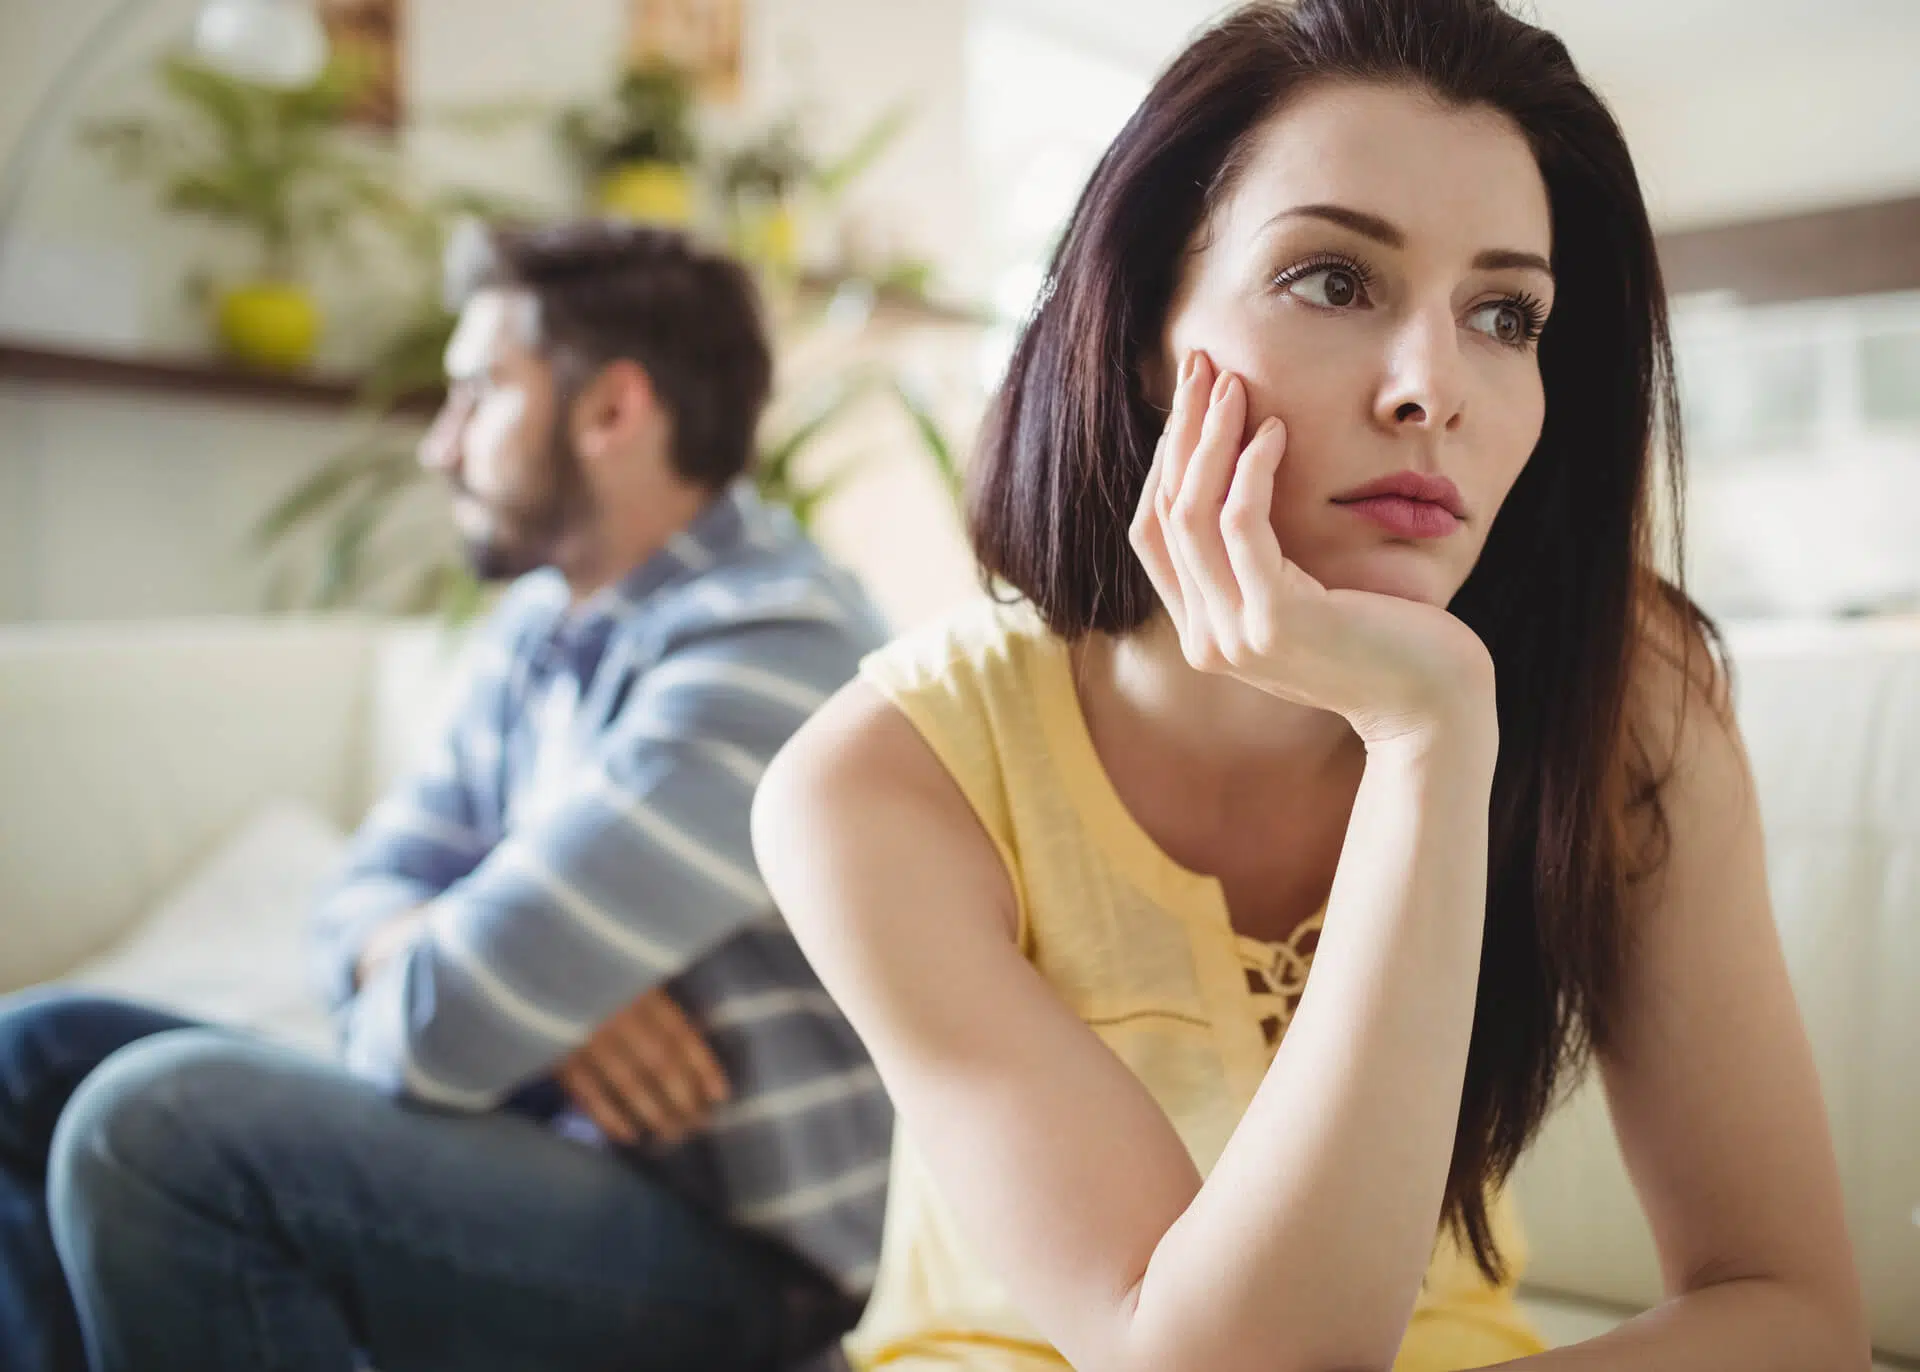 couple falling out of love after infidelity